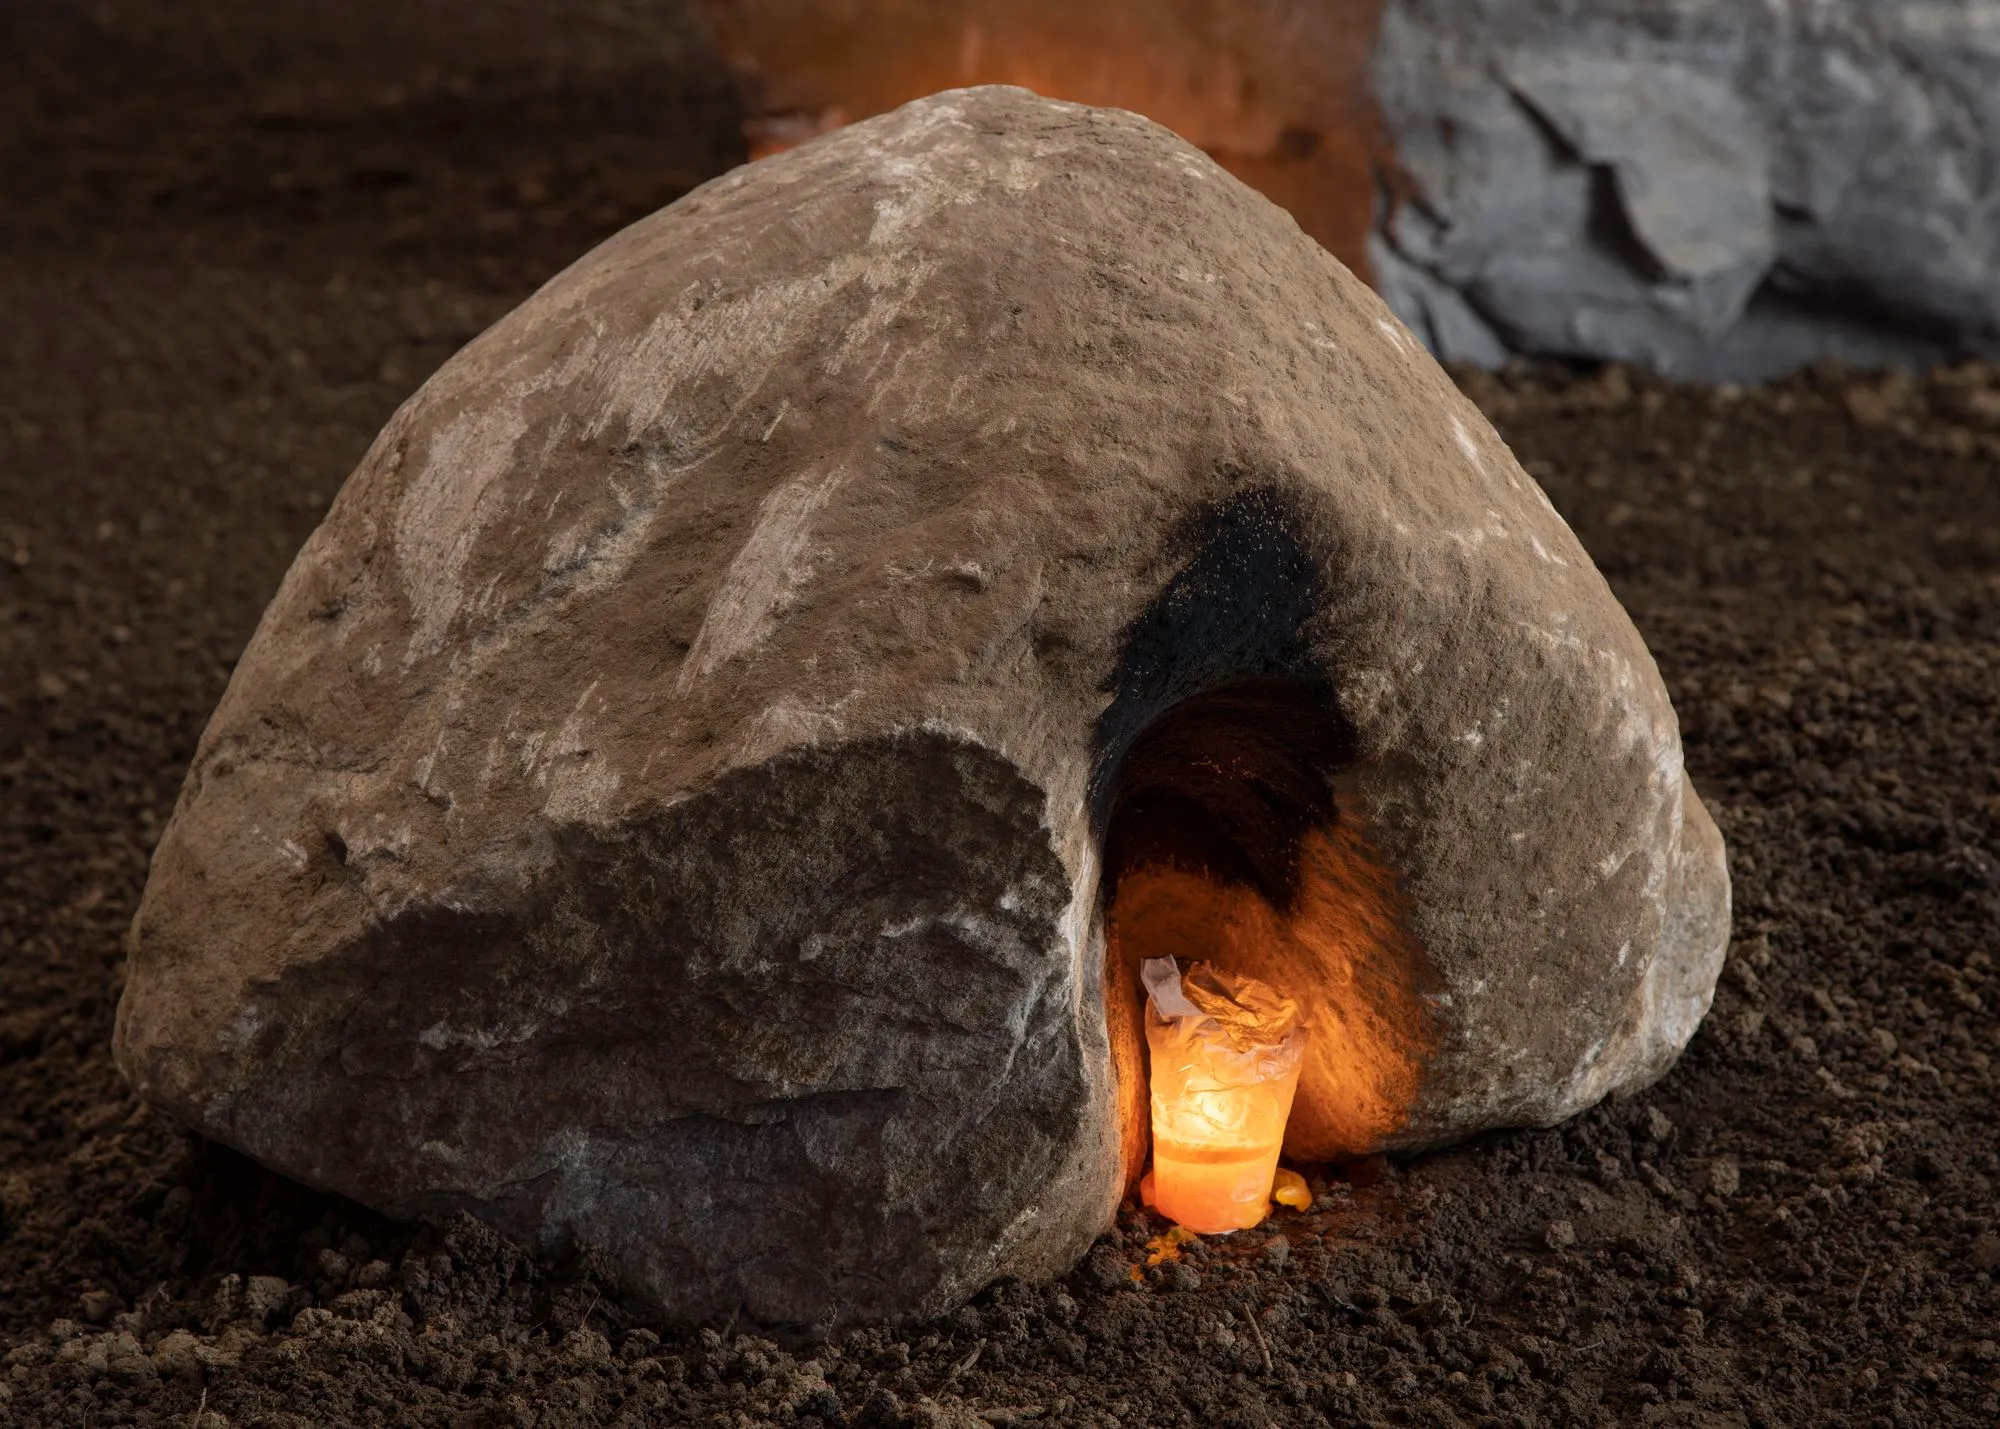 Close up of the installation, a peach-shaped rock with a burning candle